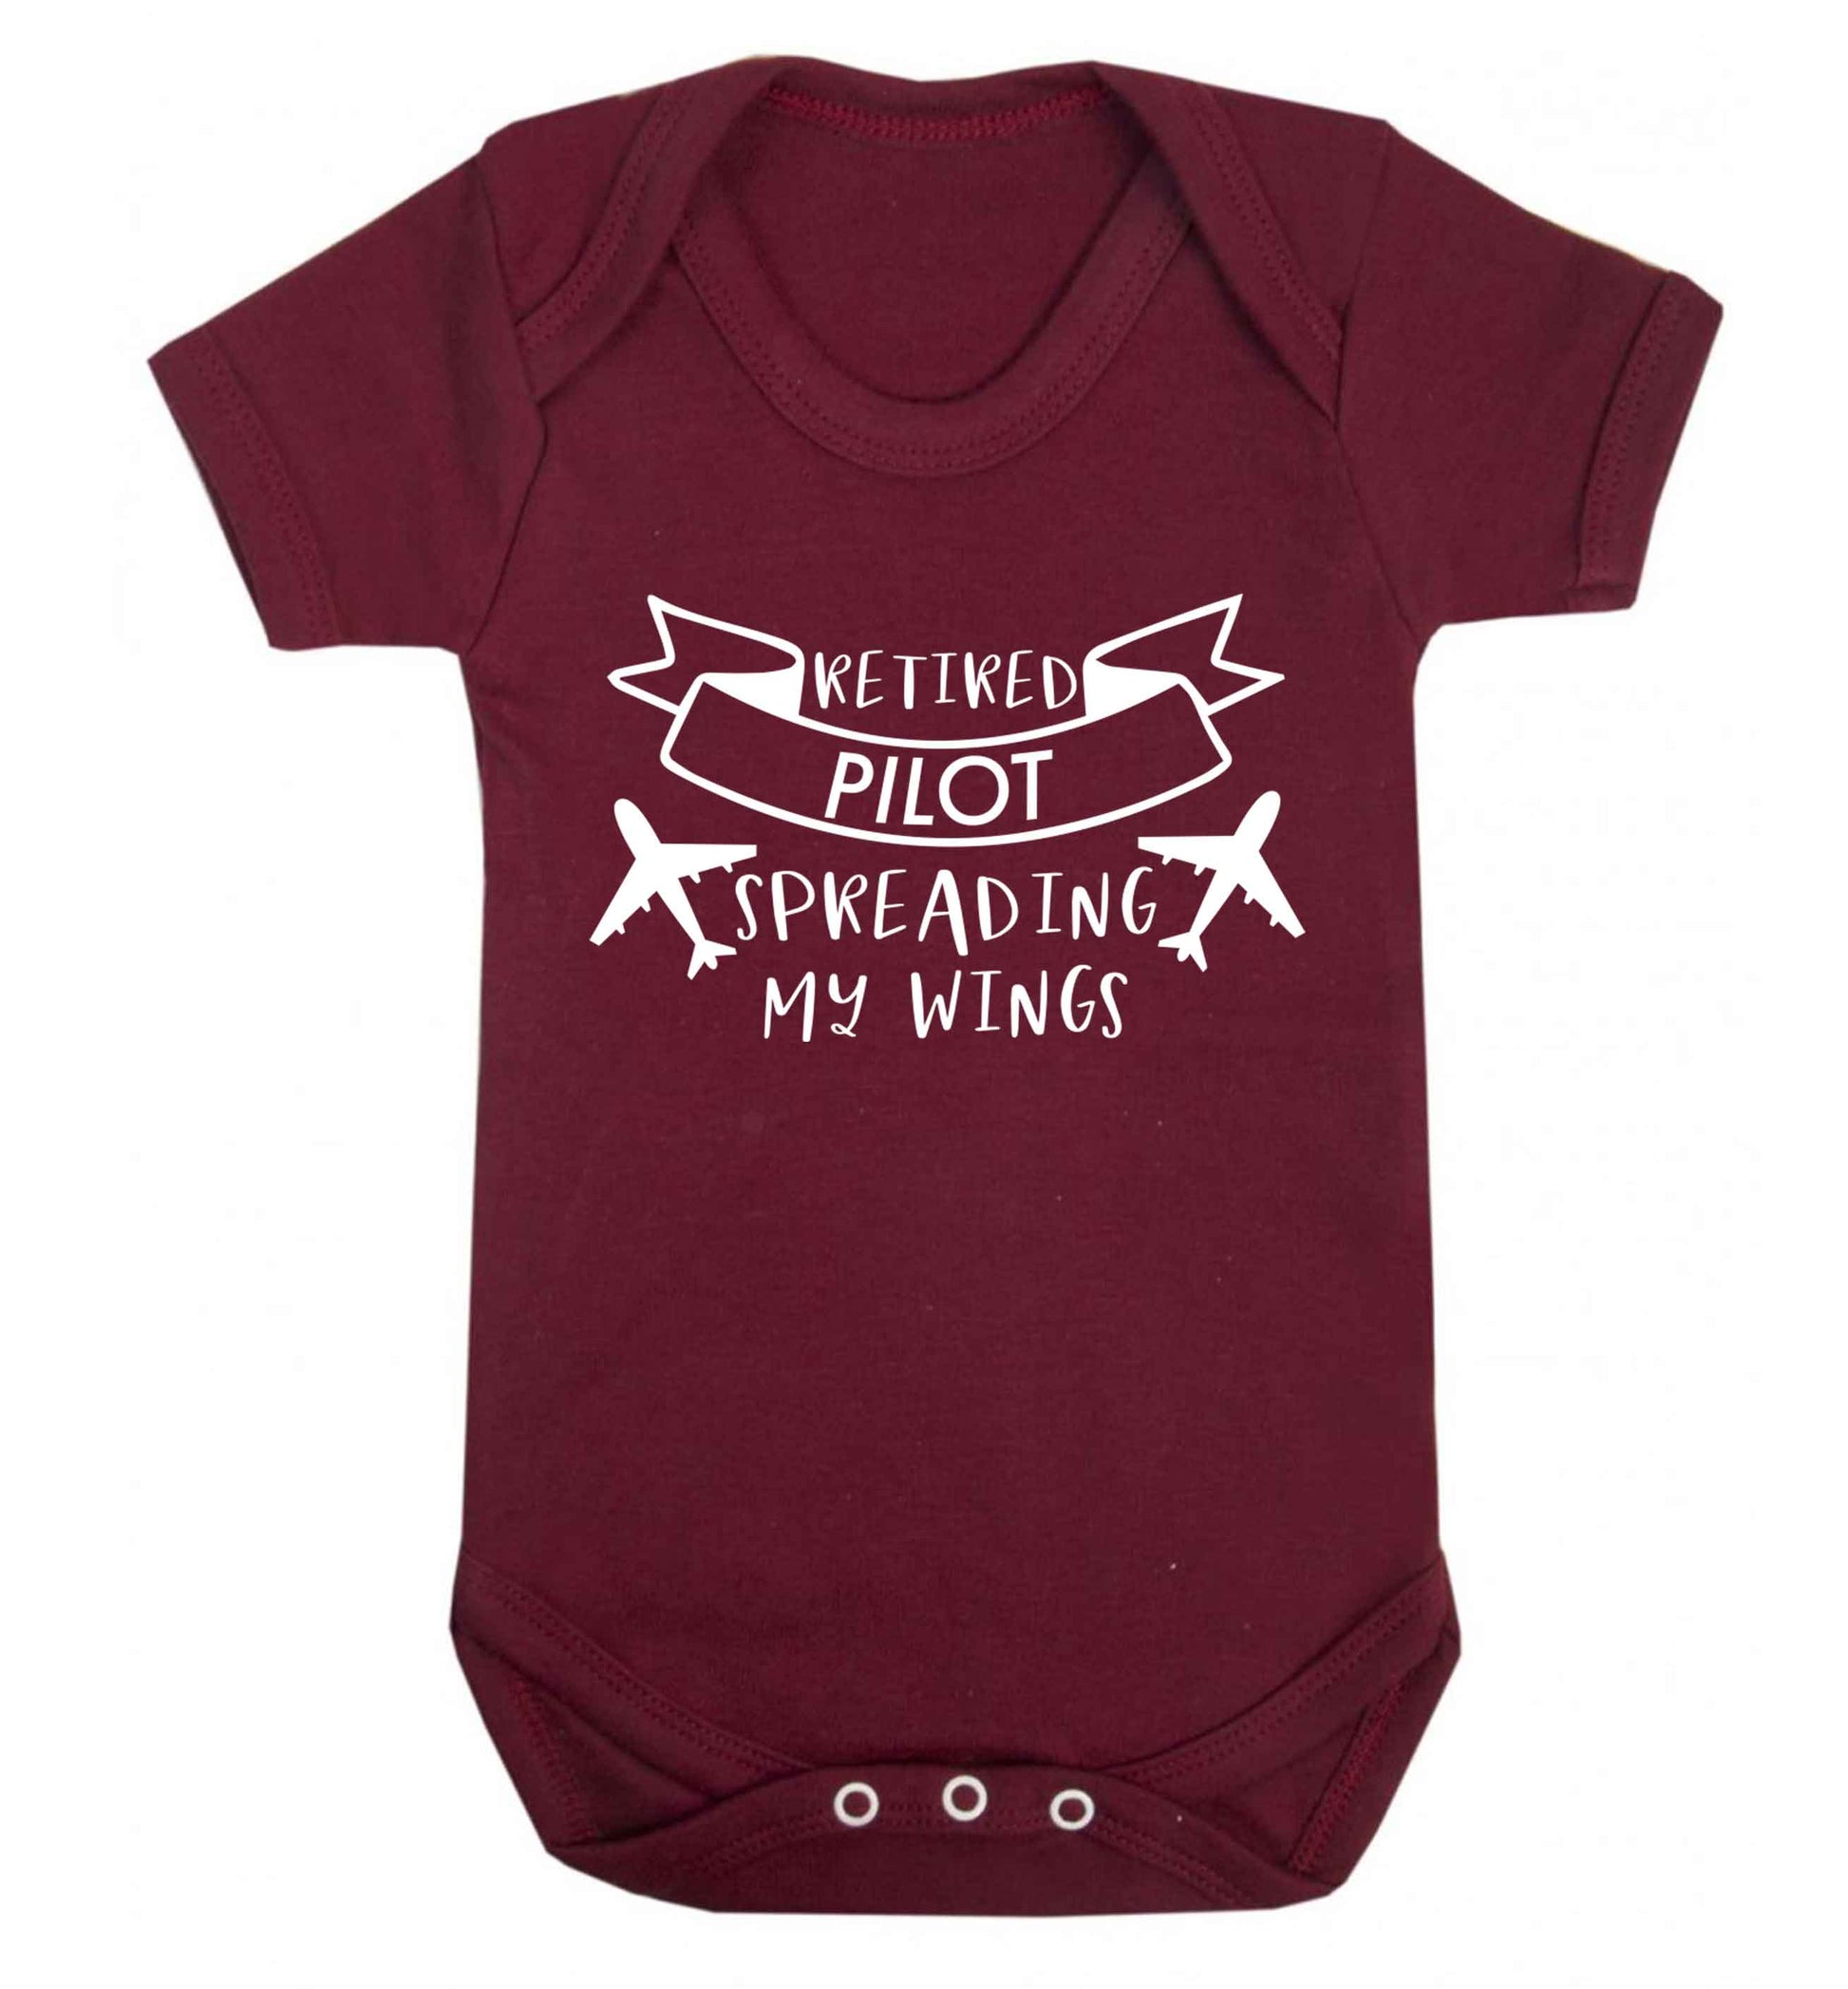 Retired pilot spreading my wings Baby Vest maroon 18-24 months